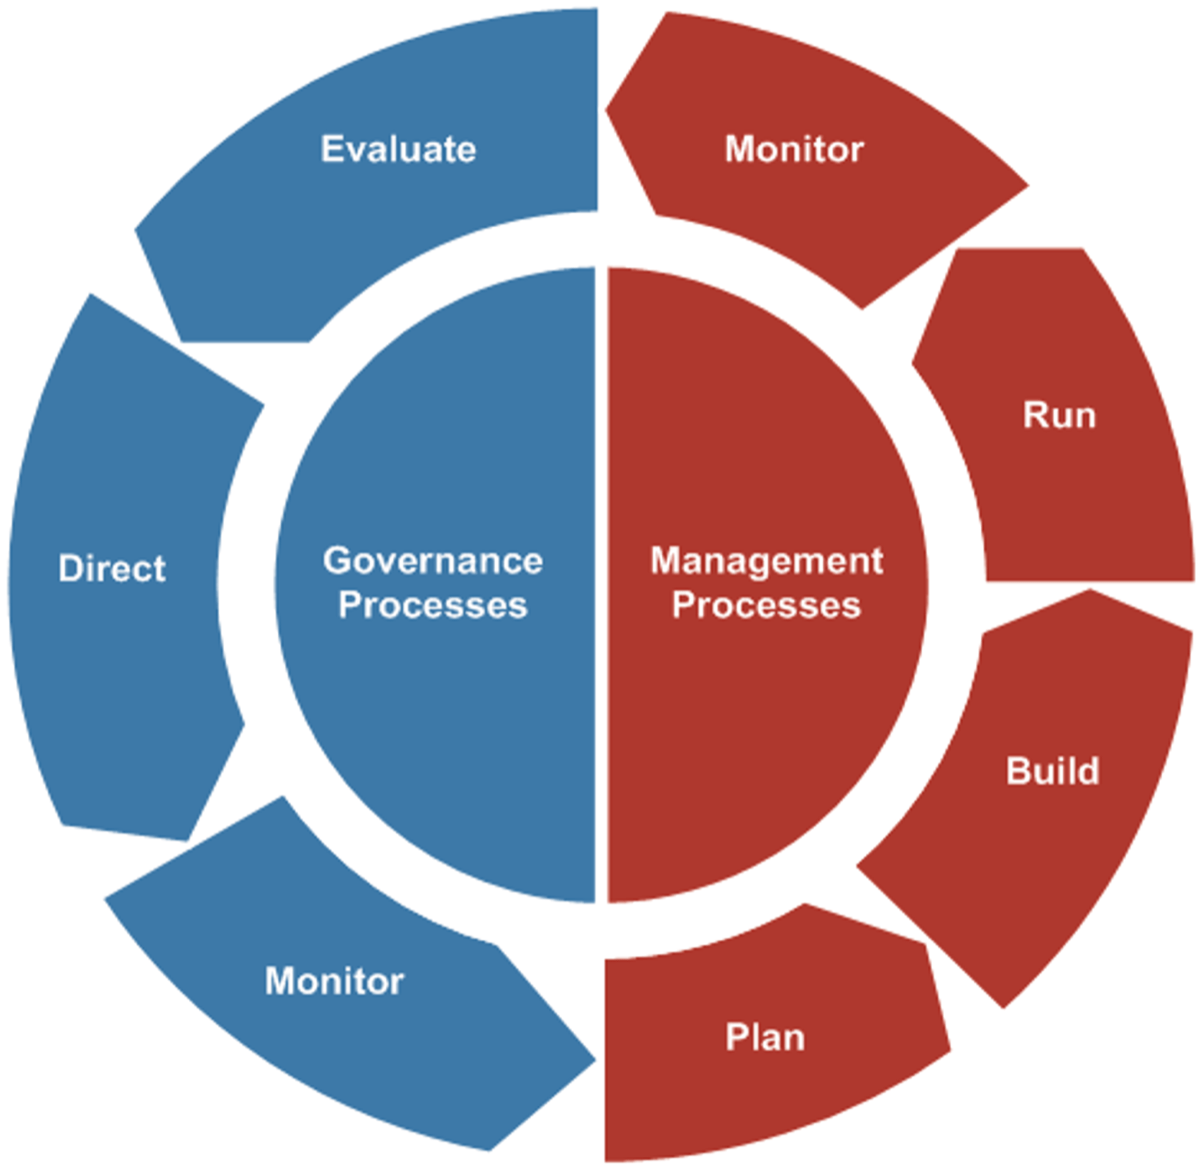 A cycle of processes split into two halves, 'Governance Processes' and 'Management Processes'. Beginning on the Management side, the processes are 'Plan', 'Build', 'Run', 'Monitor', then to the Governance side, 'Evaluate', 'Direct', 'Monitor', and back to the beginning.